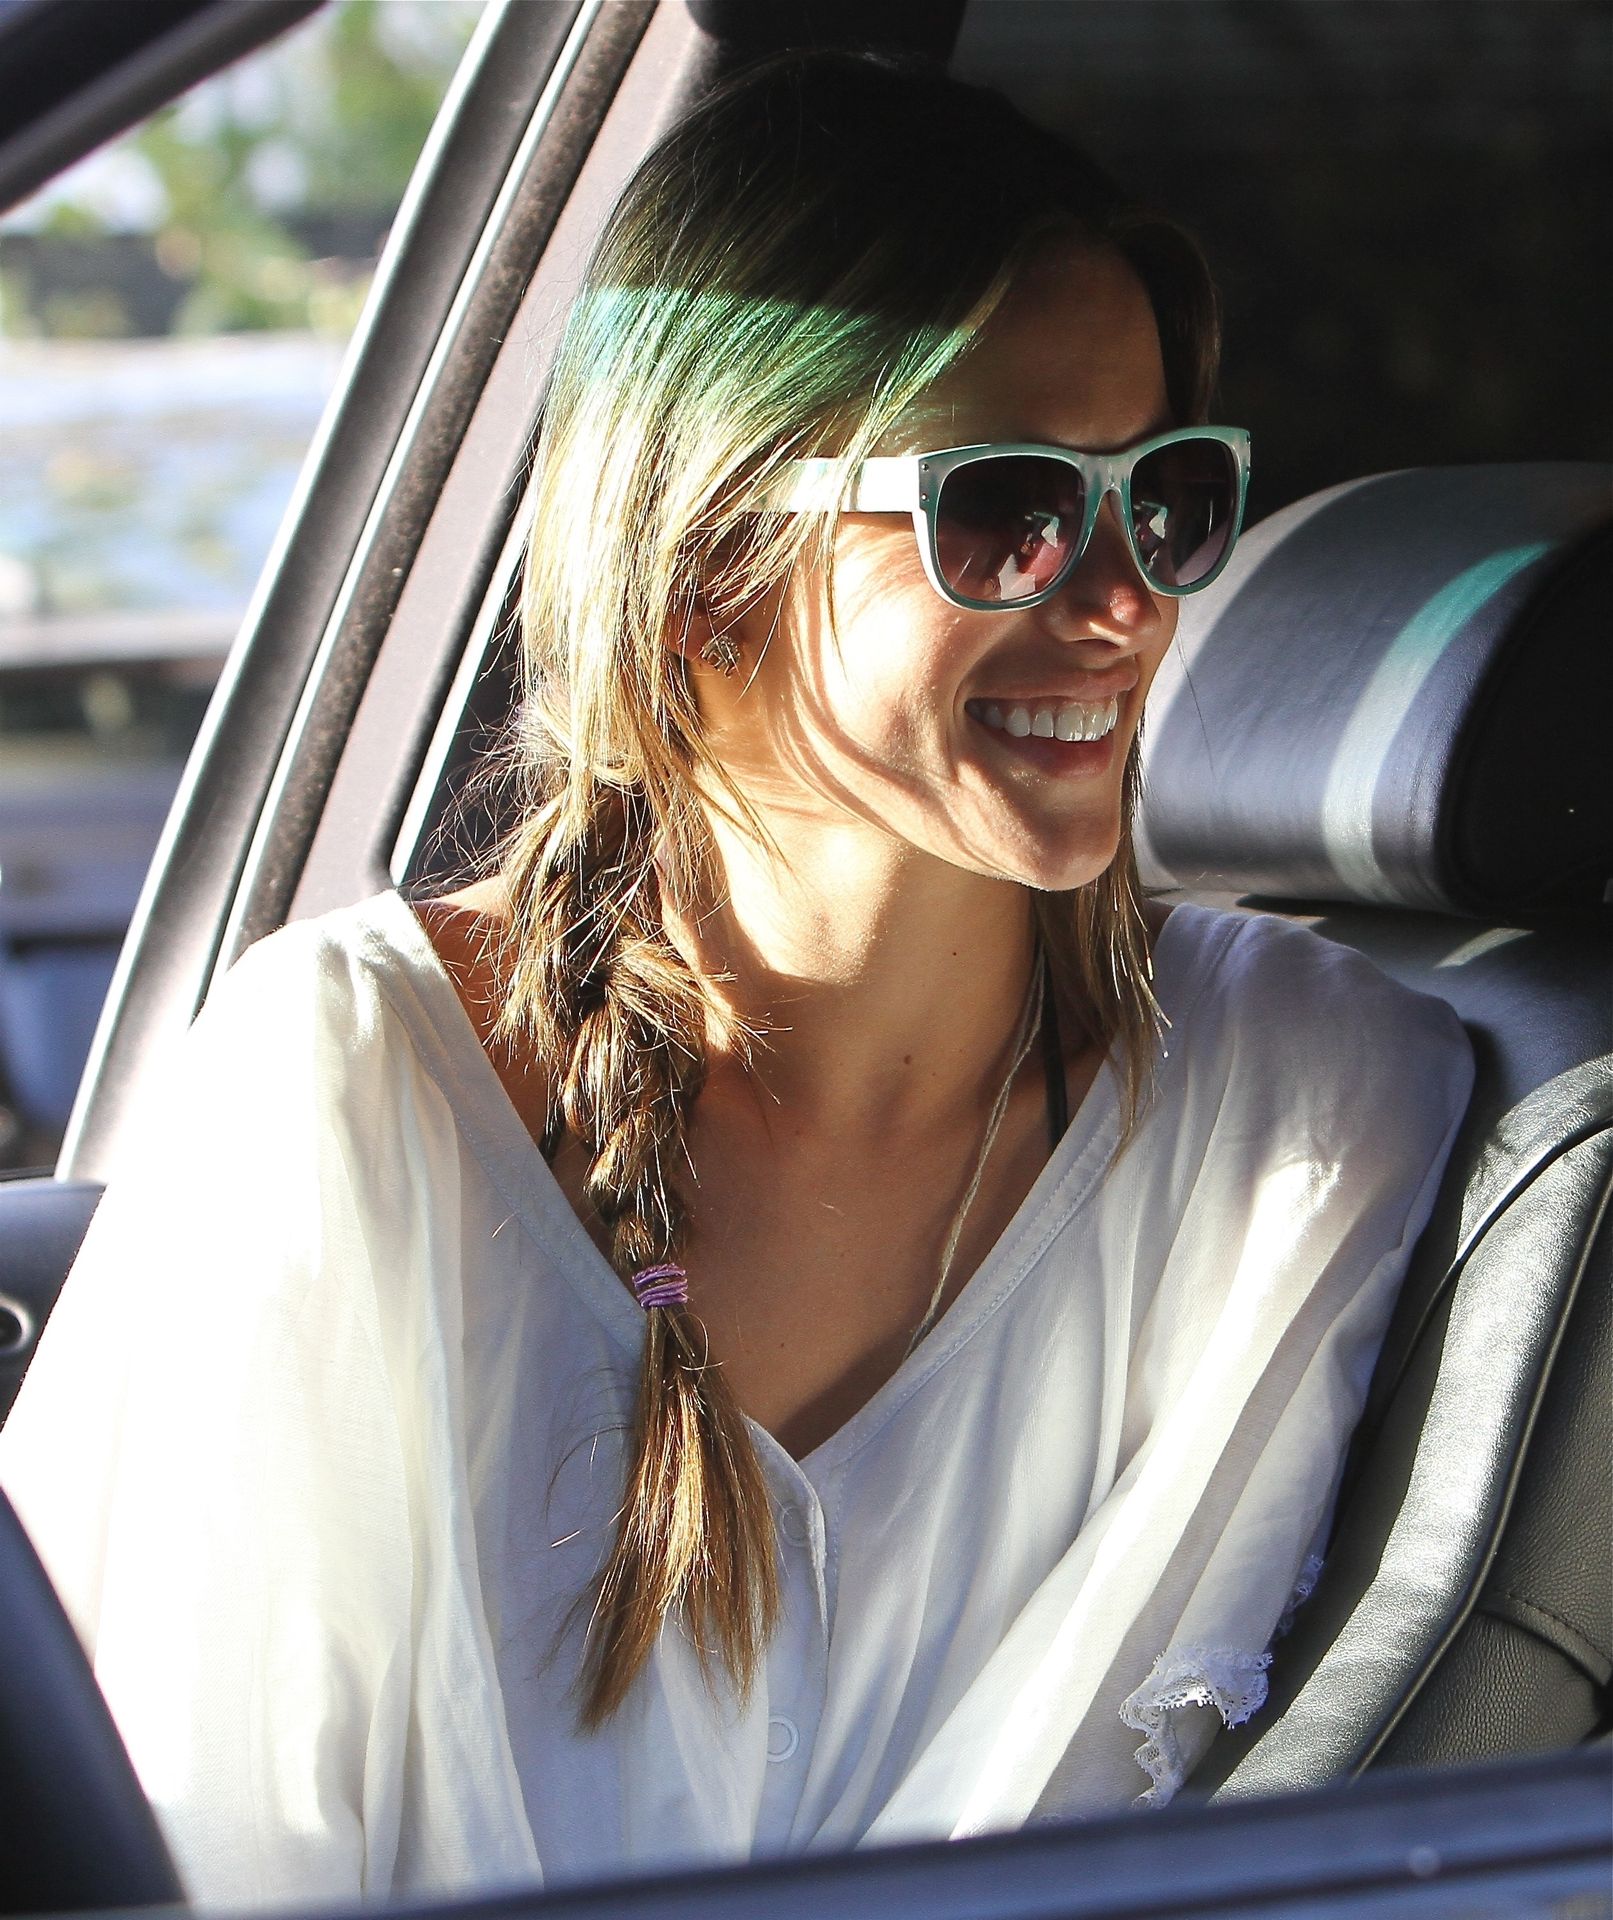 Alessandra Ambrosio Gets Some Shopping Done (29 Photos)